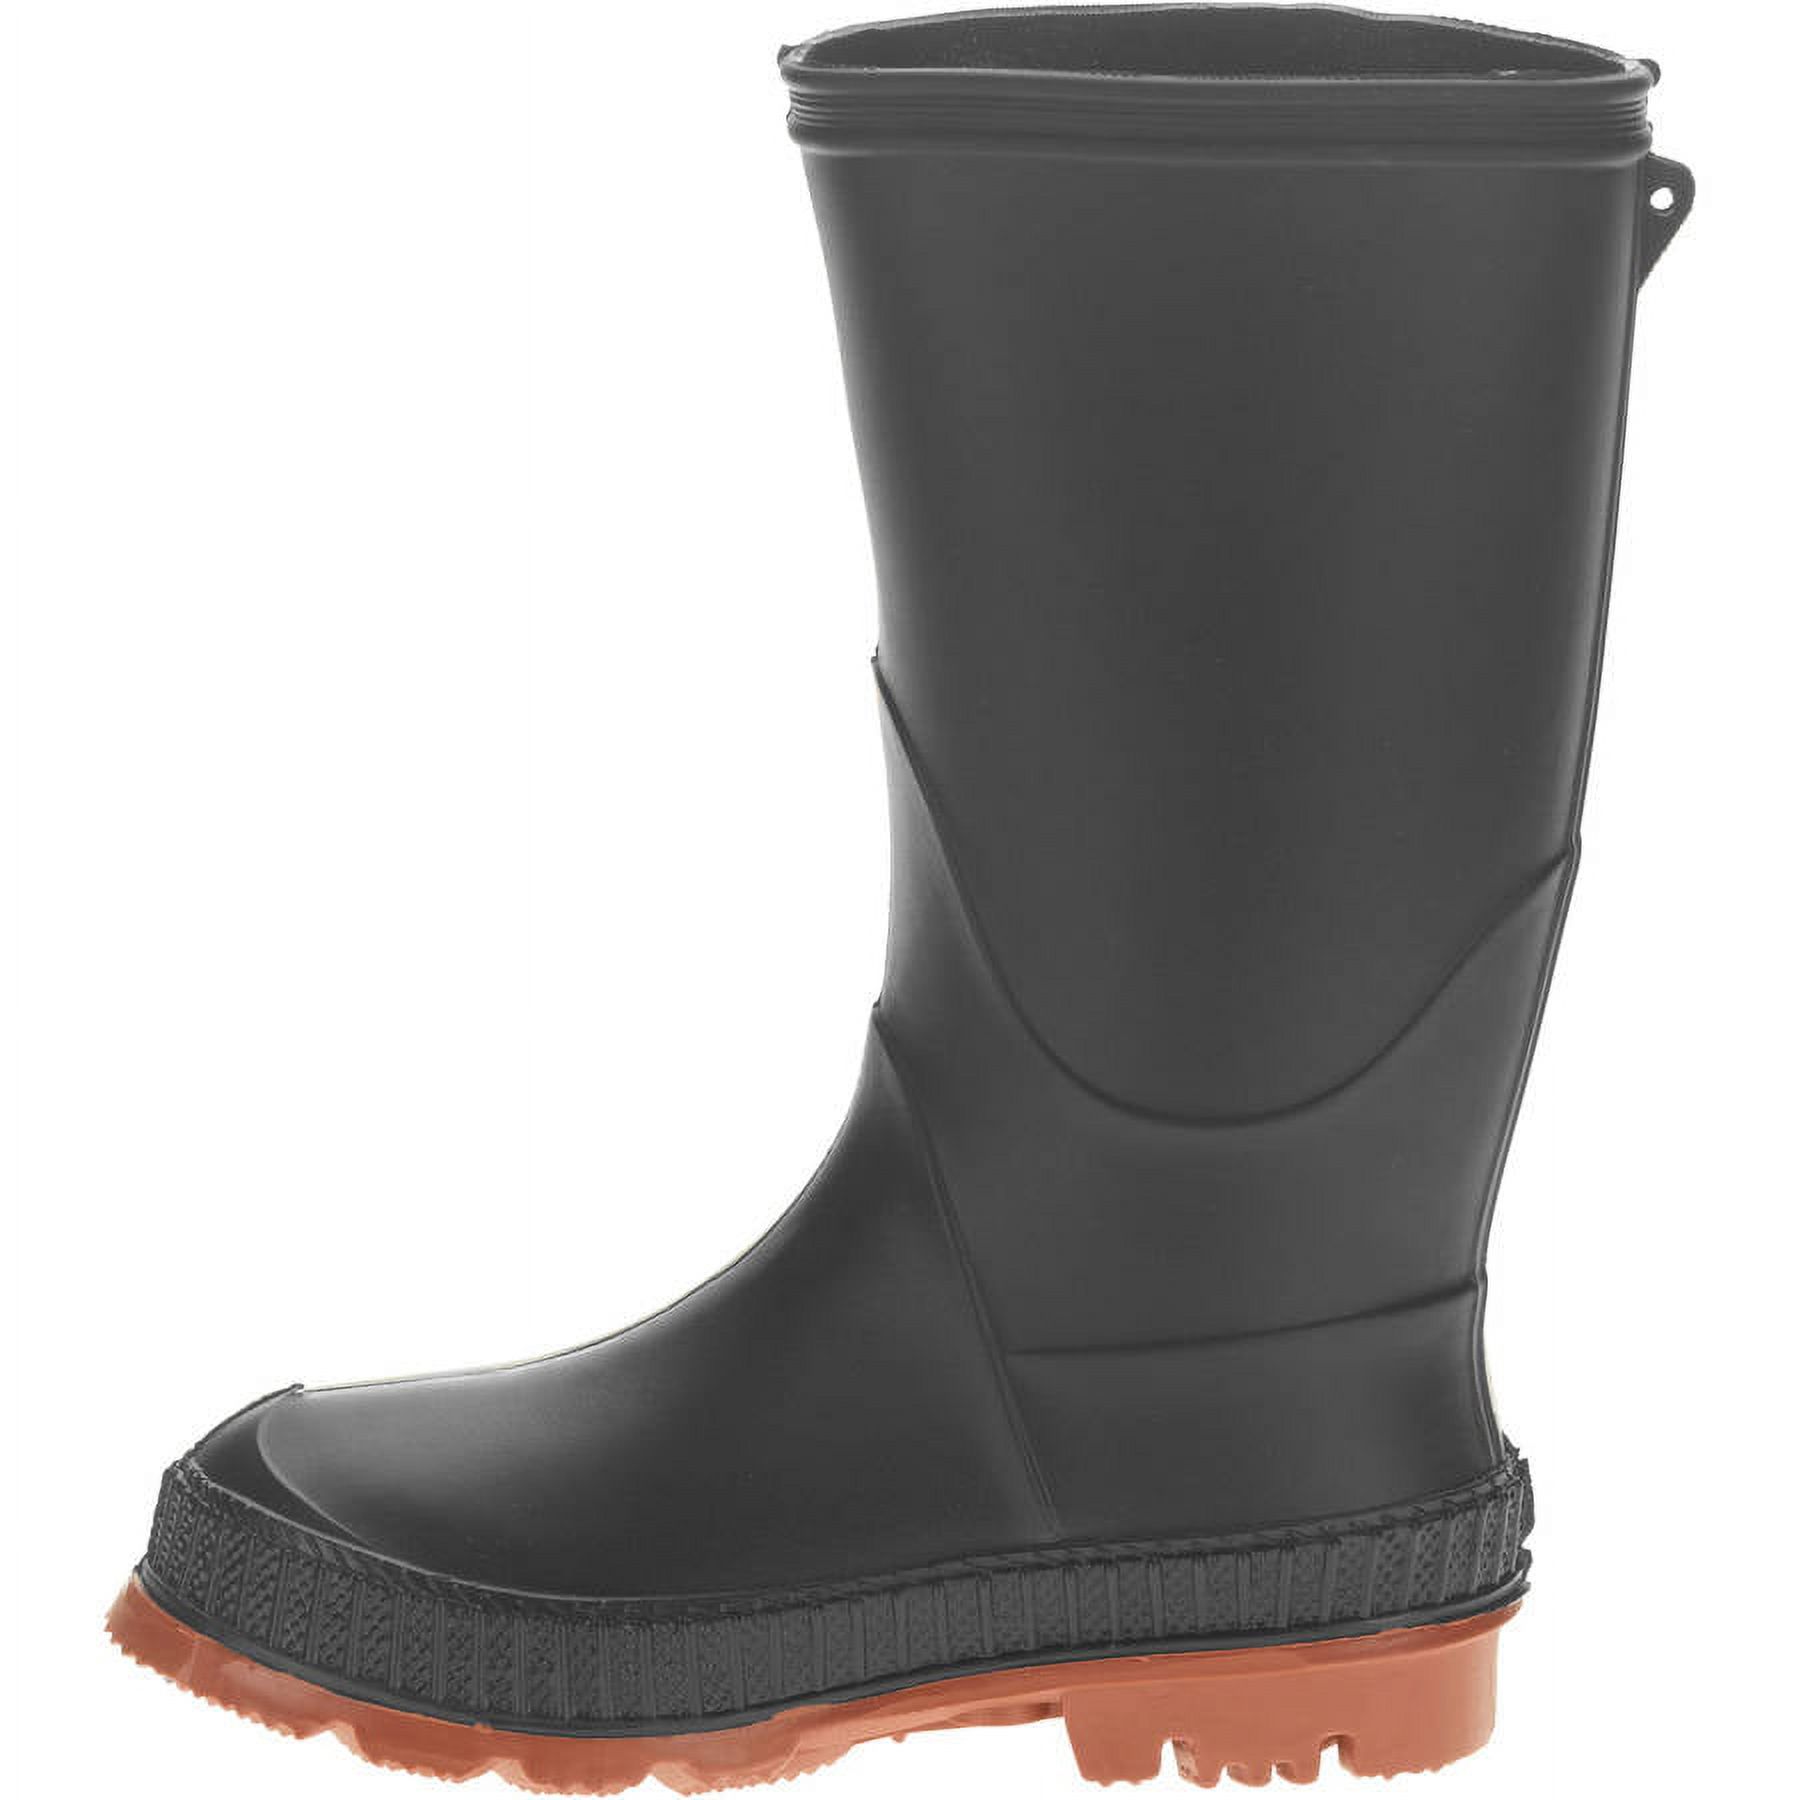 Toddler's Chain-Link Sole Chore Rain Boot - image 2 of 5